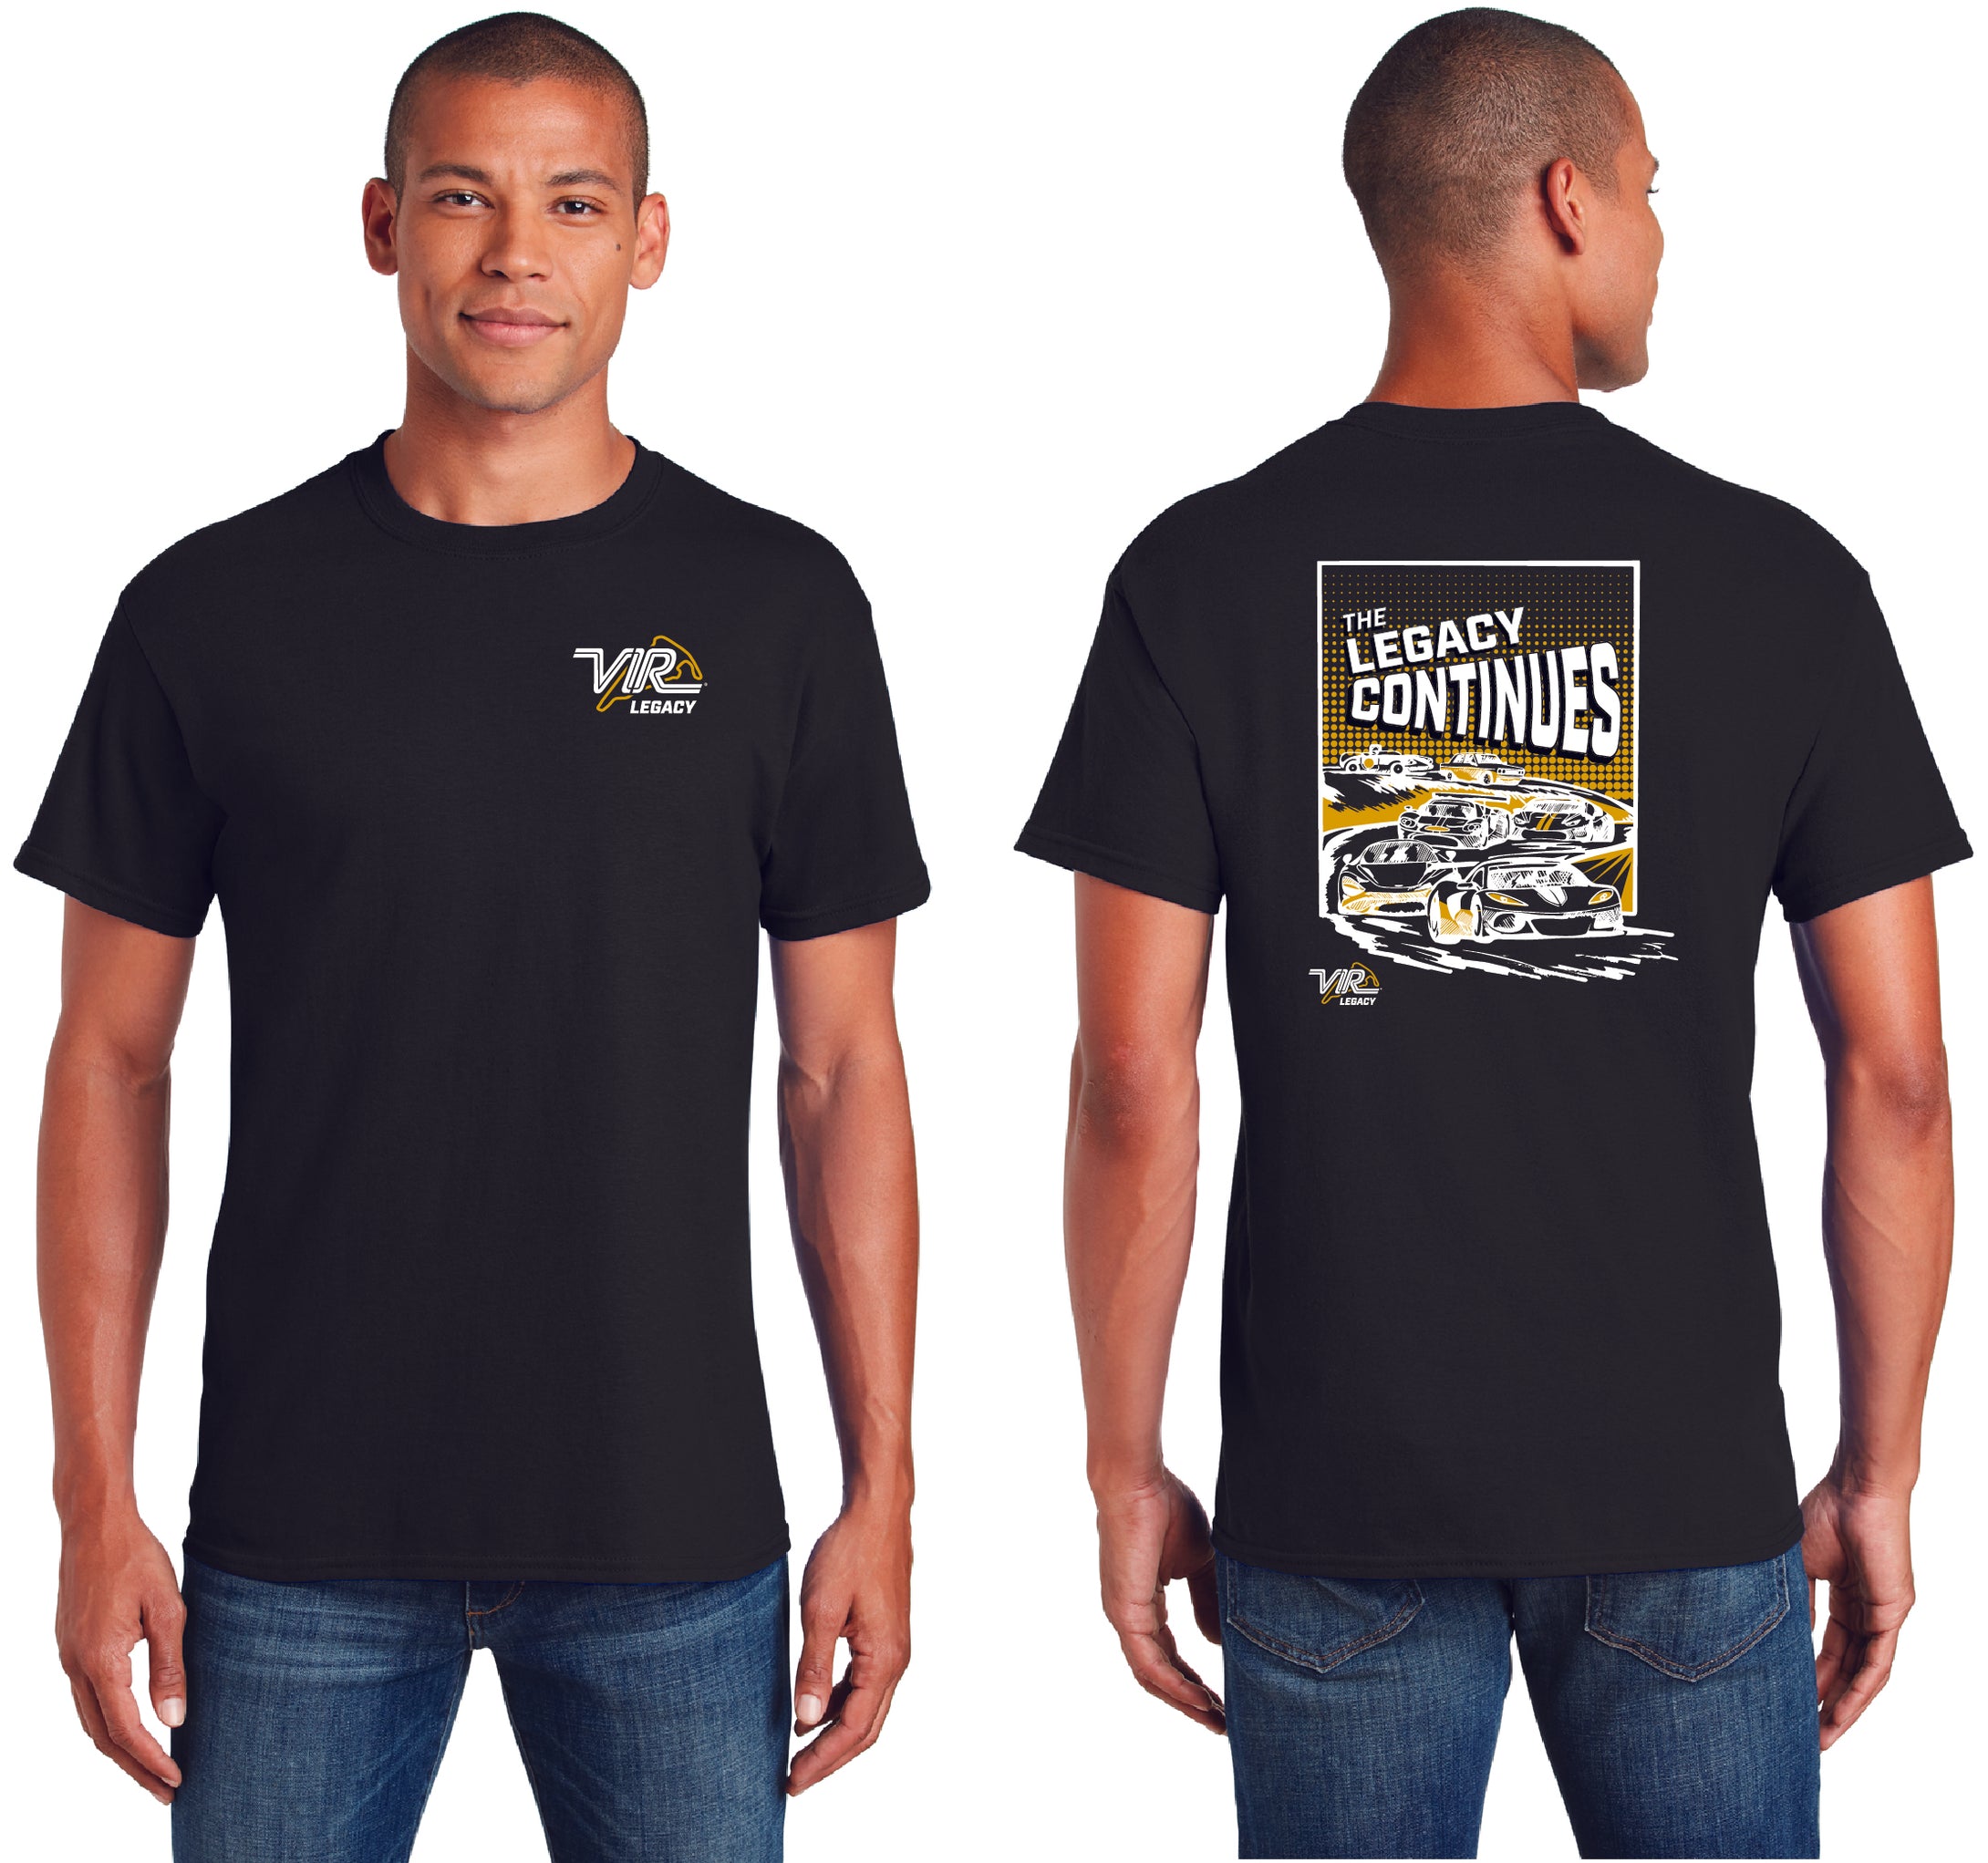 VIR Legacy Continues Tee (Size: S - 3XL)